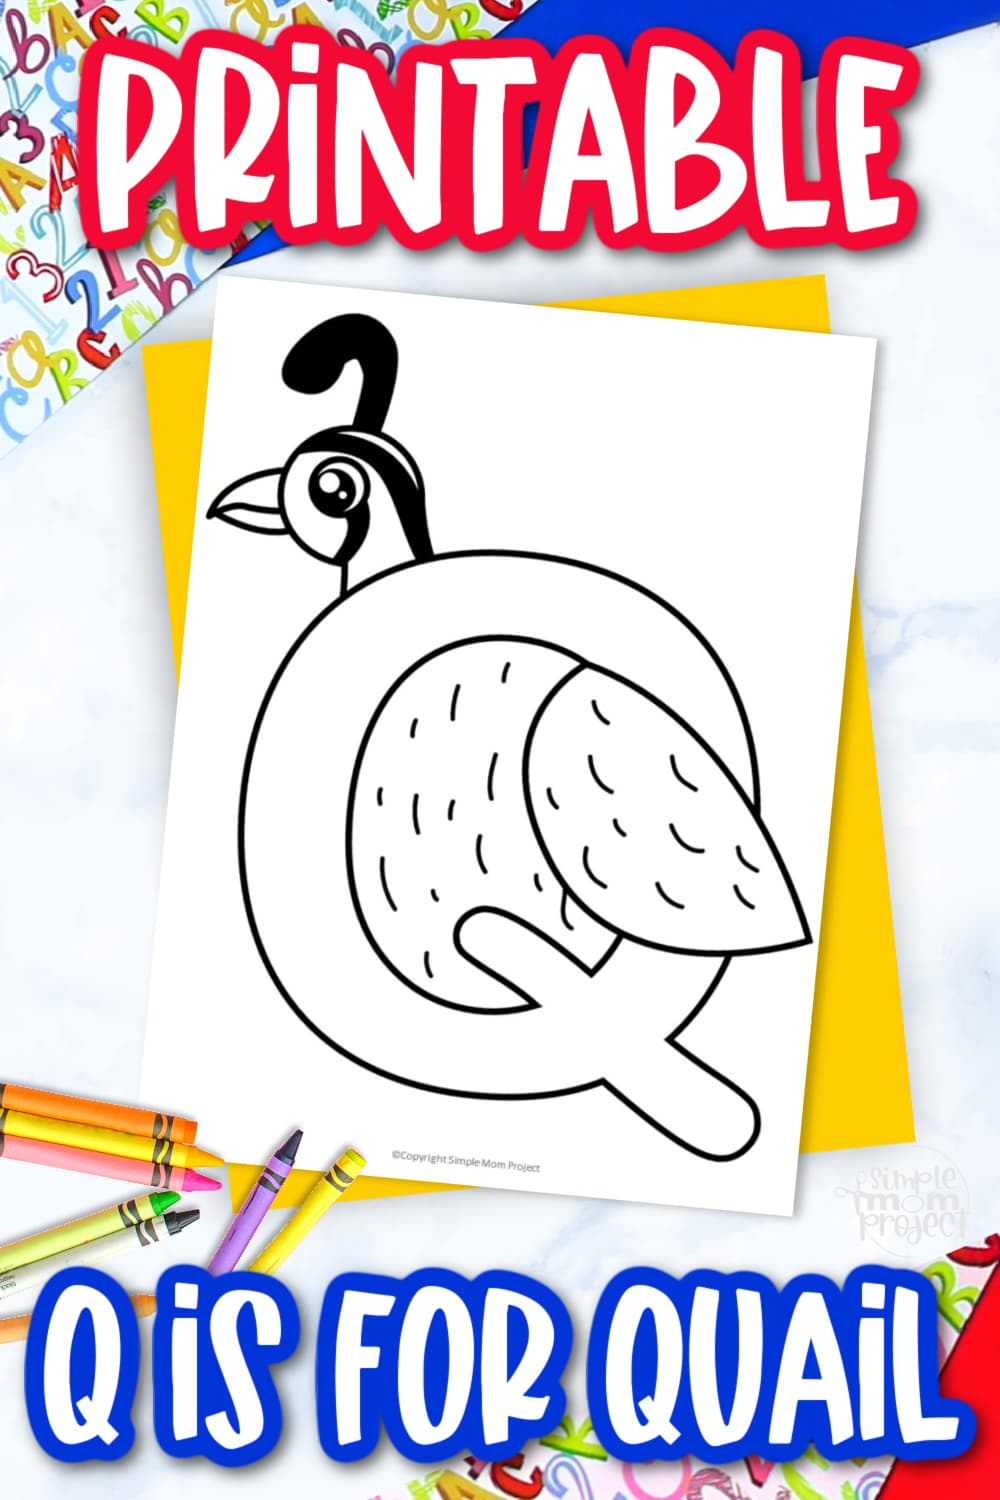 Free printable letter q coloring page â simple mom project